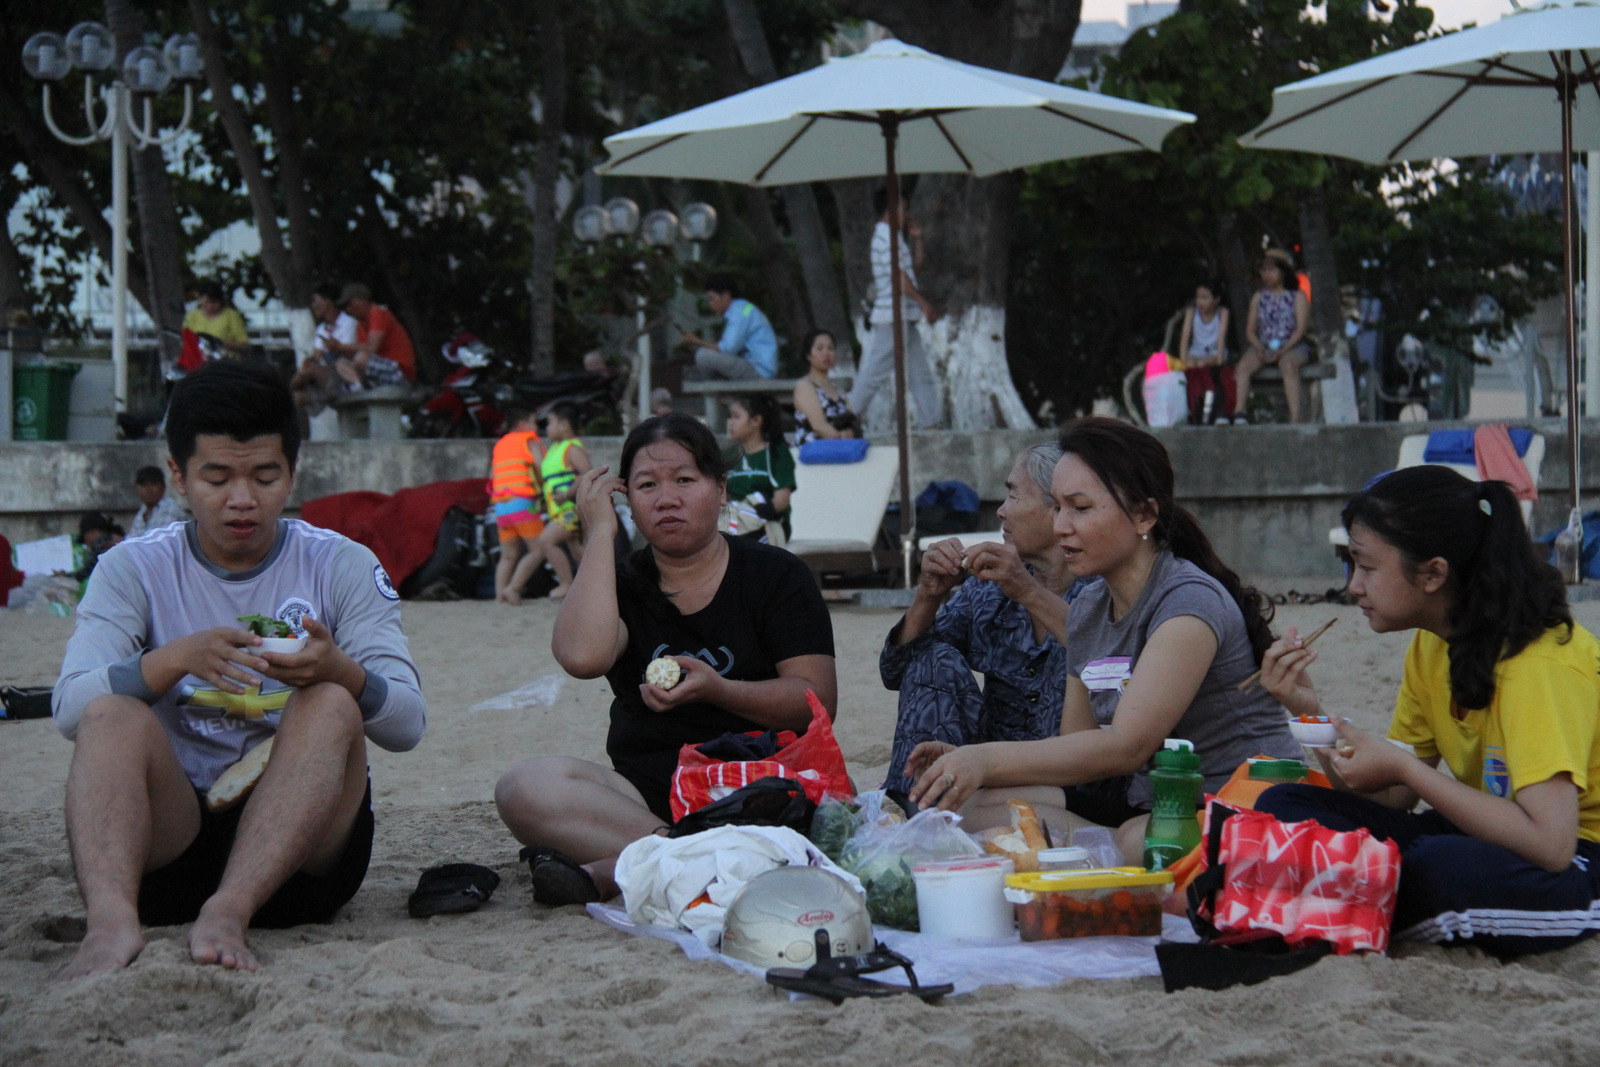 Many people have picnic at the beach